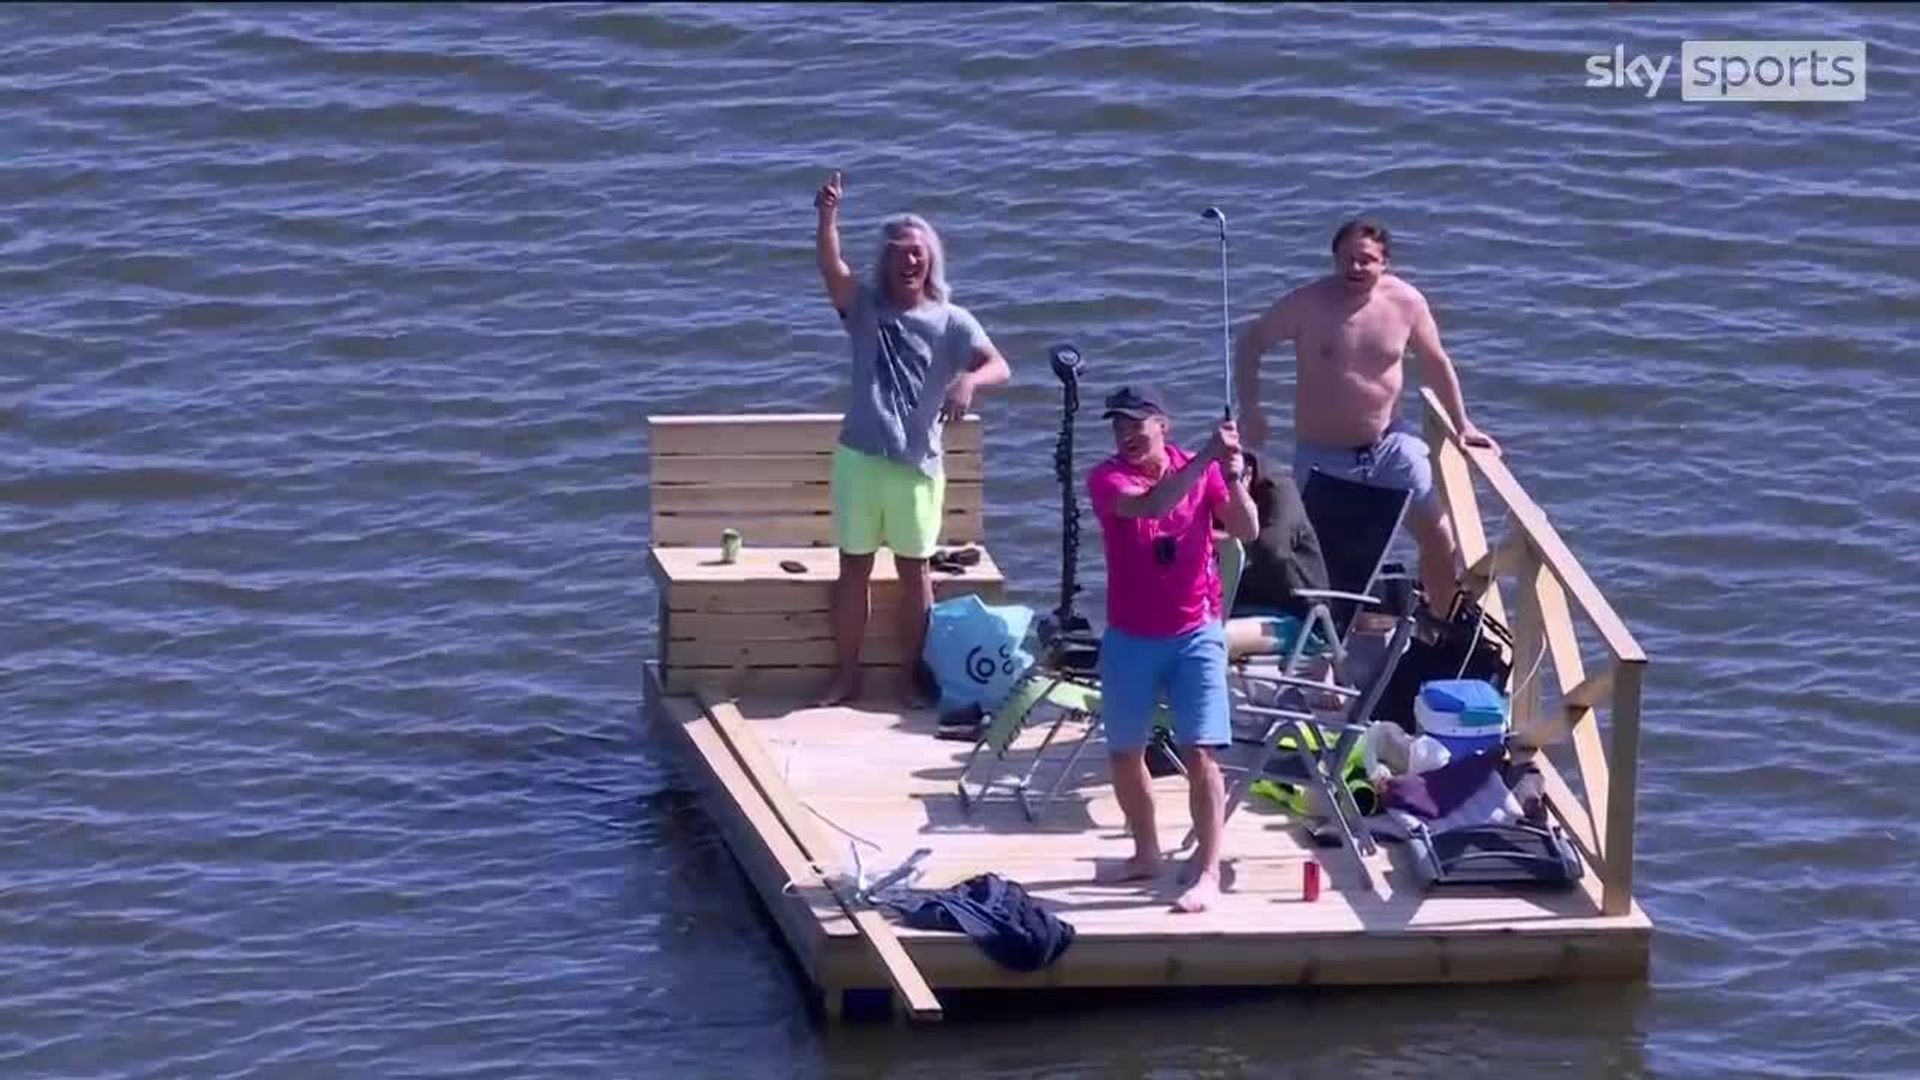 'This is bold!' | Fan attempts shot on sinking pontoon